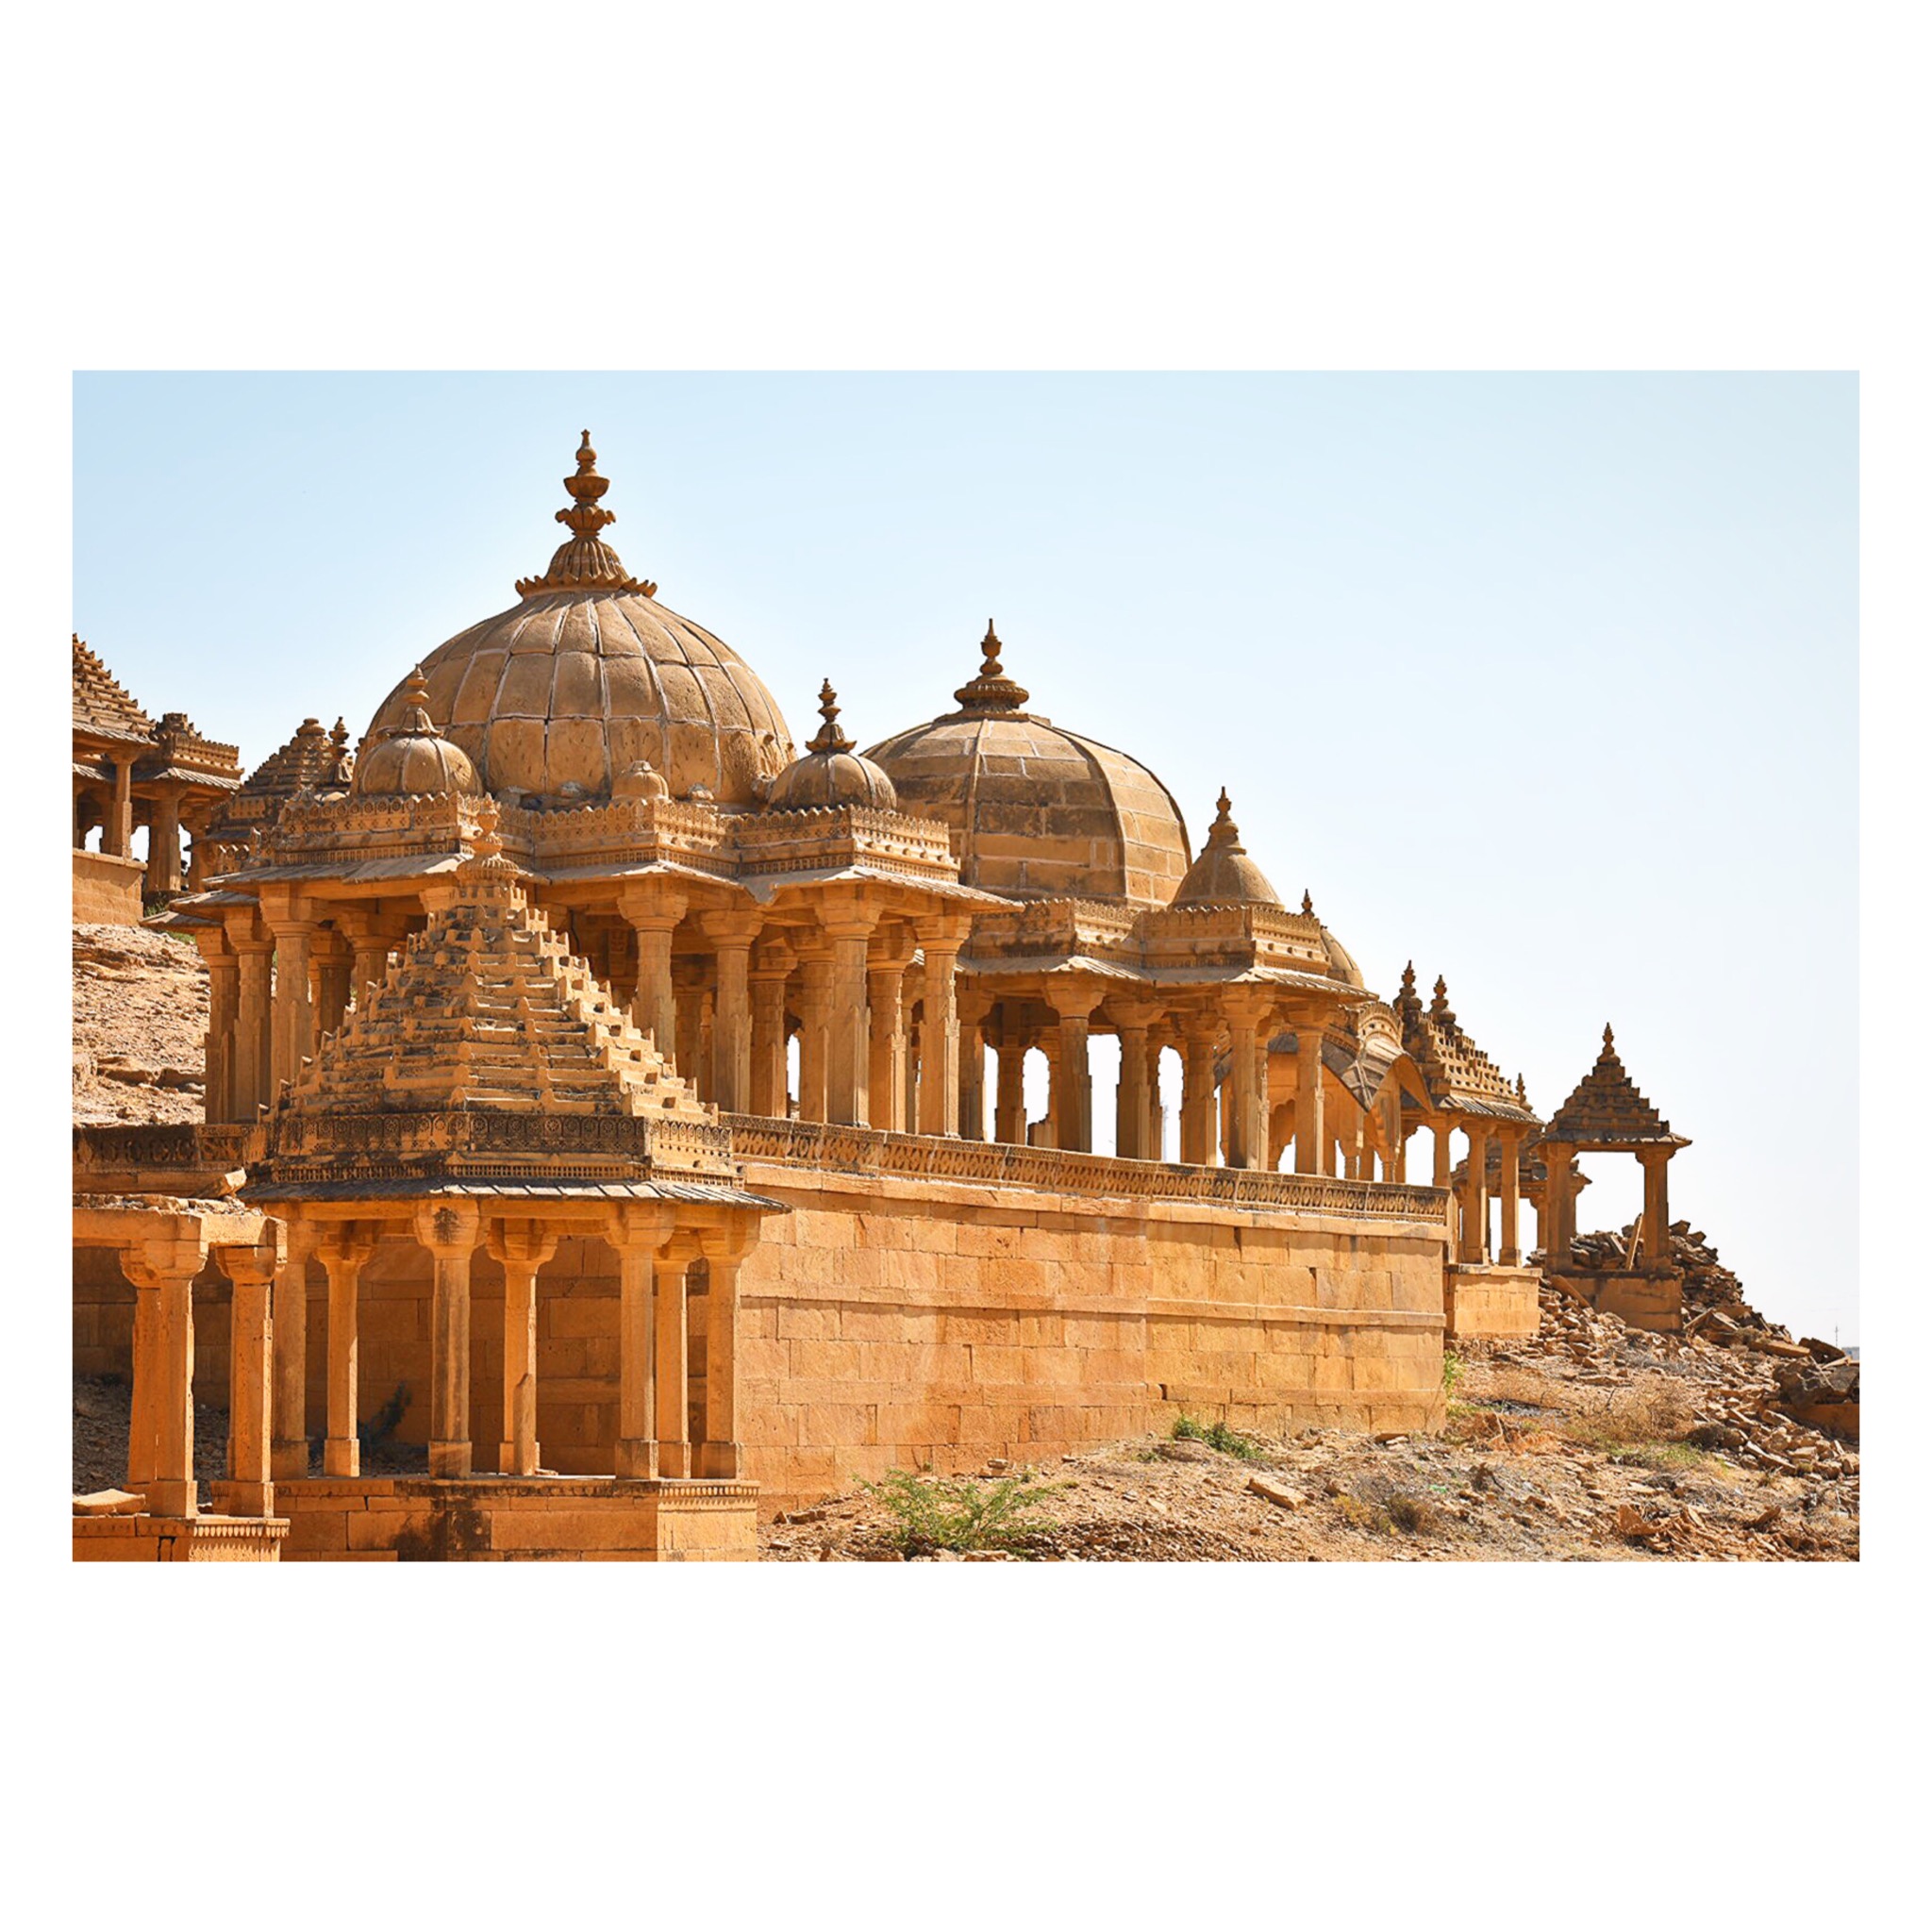 Jaisalmer cemeteries srrounded by desert ???? but plethora of beauty to explore from .